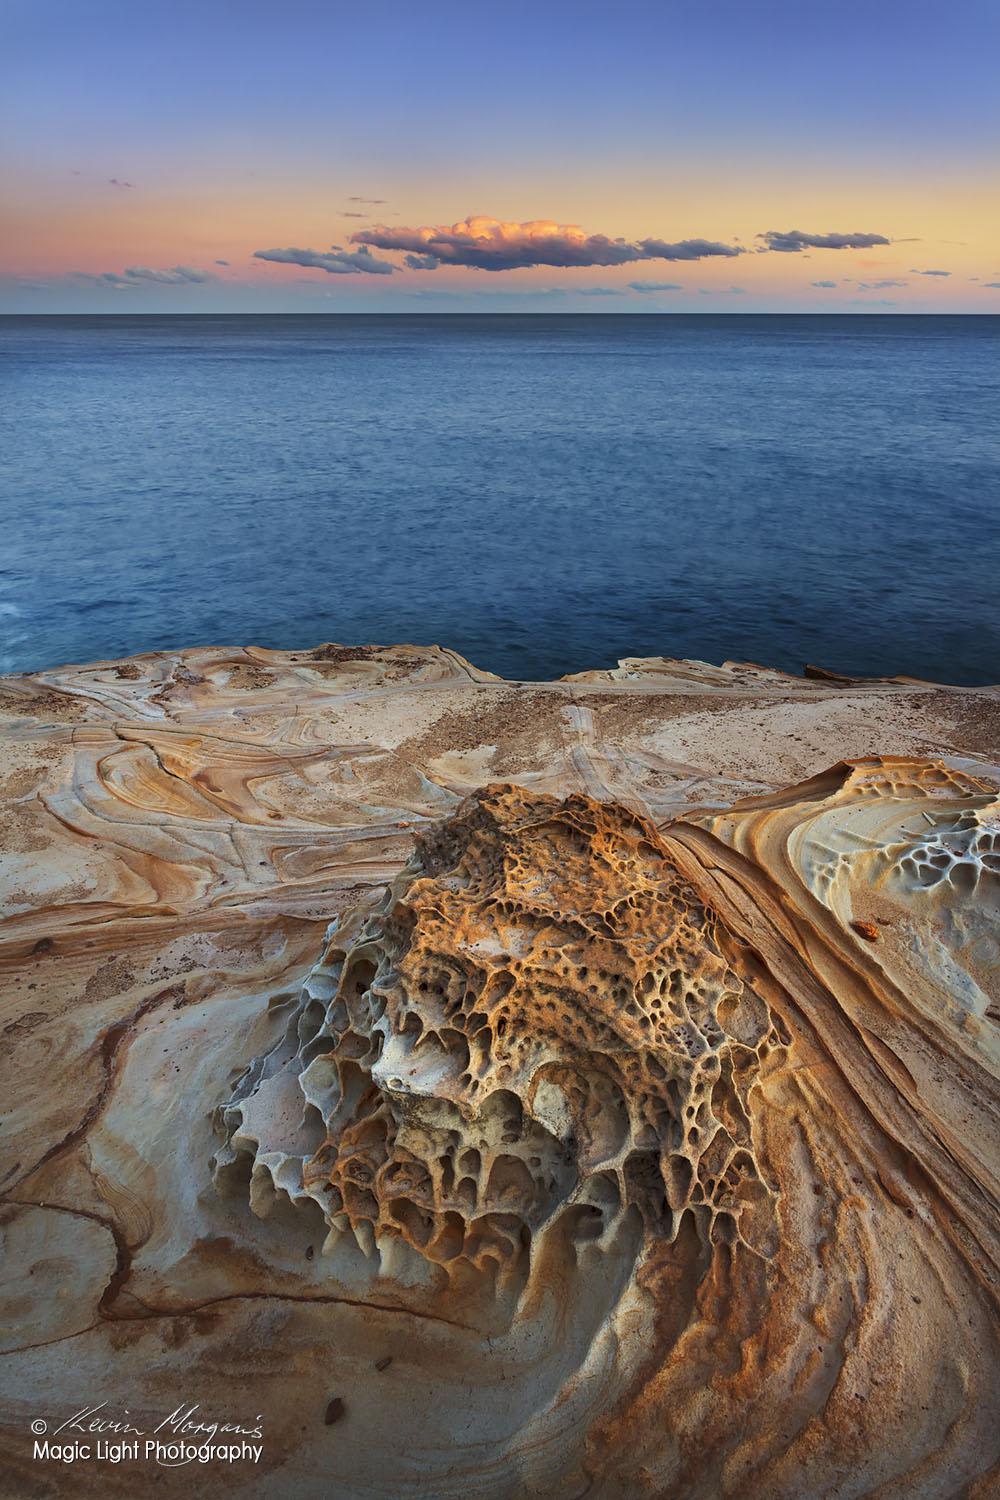 Sunset last night on the rocks at the northern end of Putty Beach in the Bouddi National Park in New South Wales, Australia. I love the colours, shapes and patterns in the sandstone on this headland.